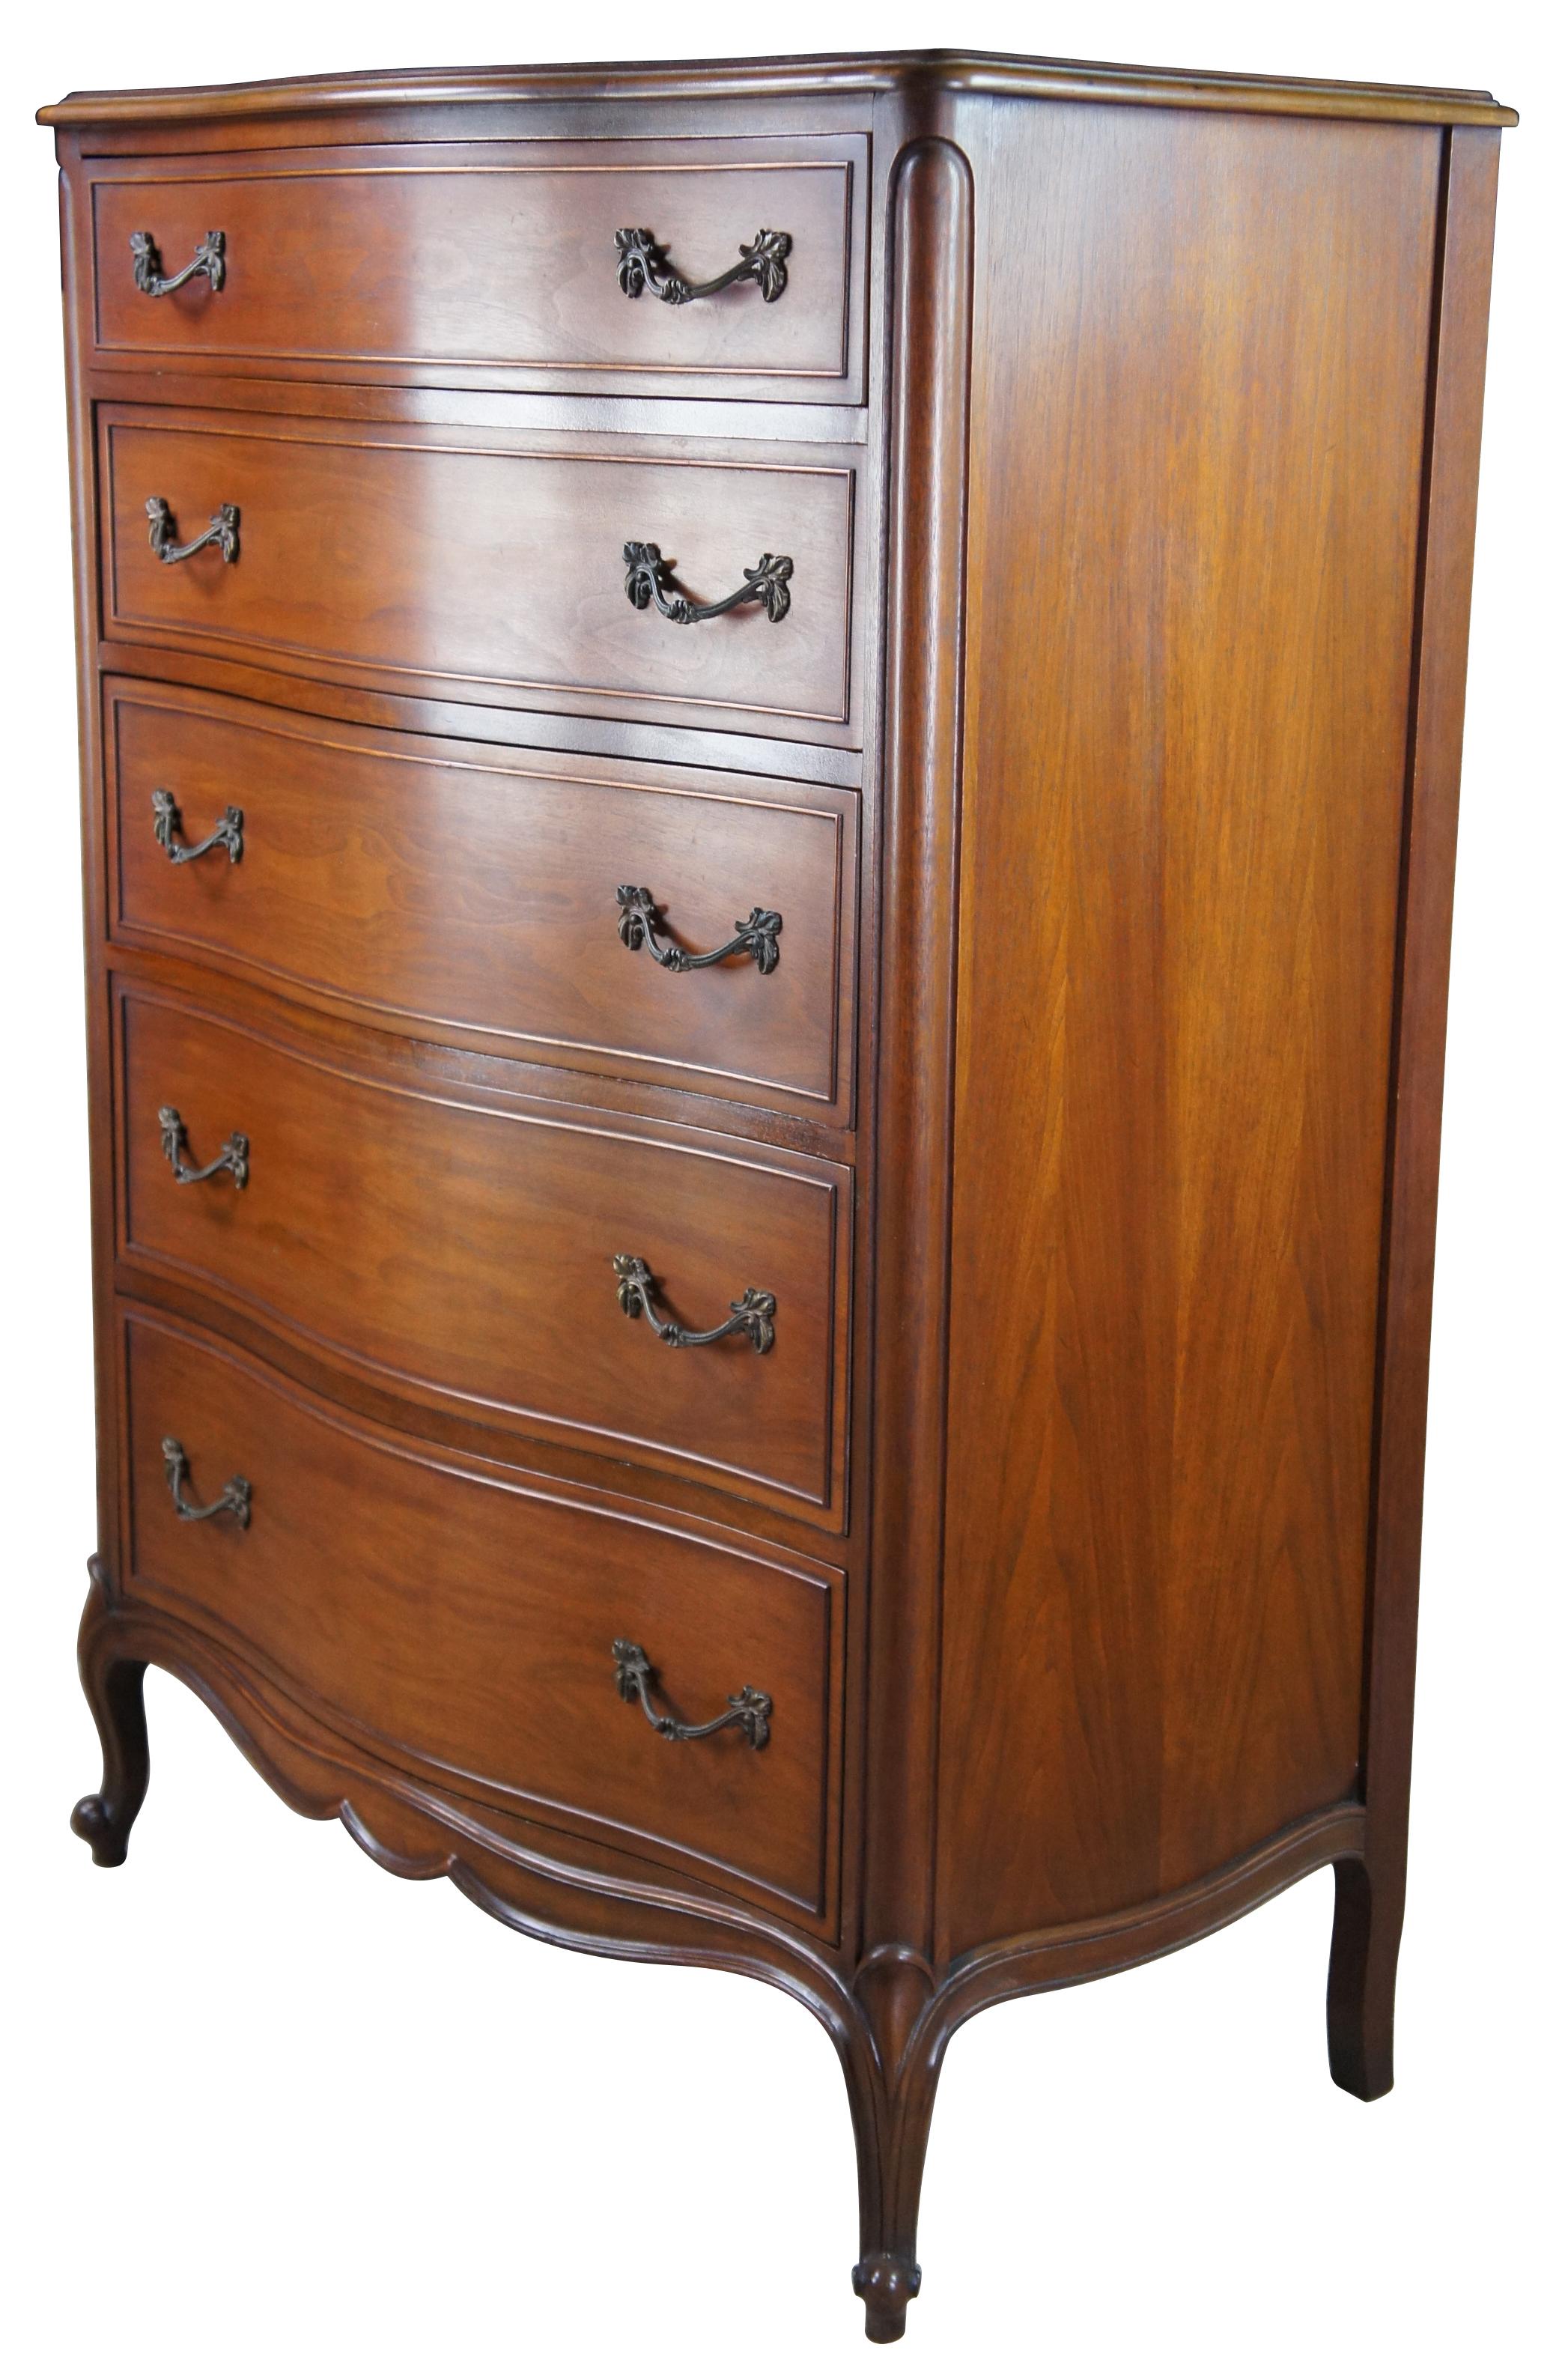 French Provincial Walnut tallboy dresser or chest by Drexel Furniture, circa 1966. Made from walnut with bordeux finish. Features a serpentine form of five drawers and cabriole legs with scrolled feet. 206-410.
    